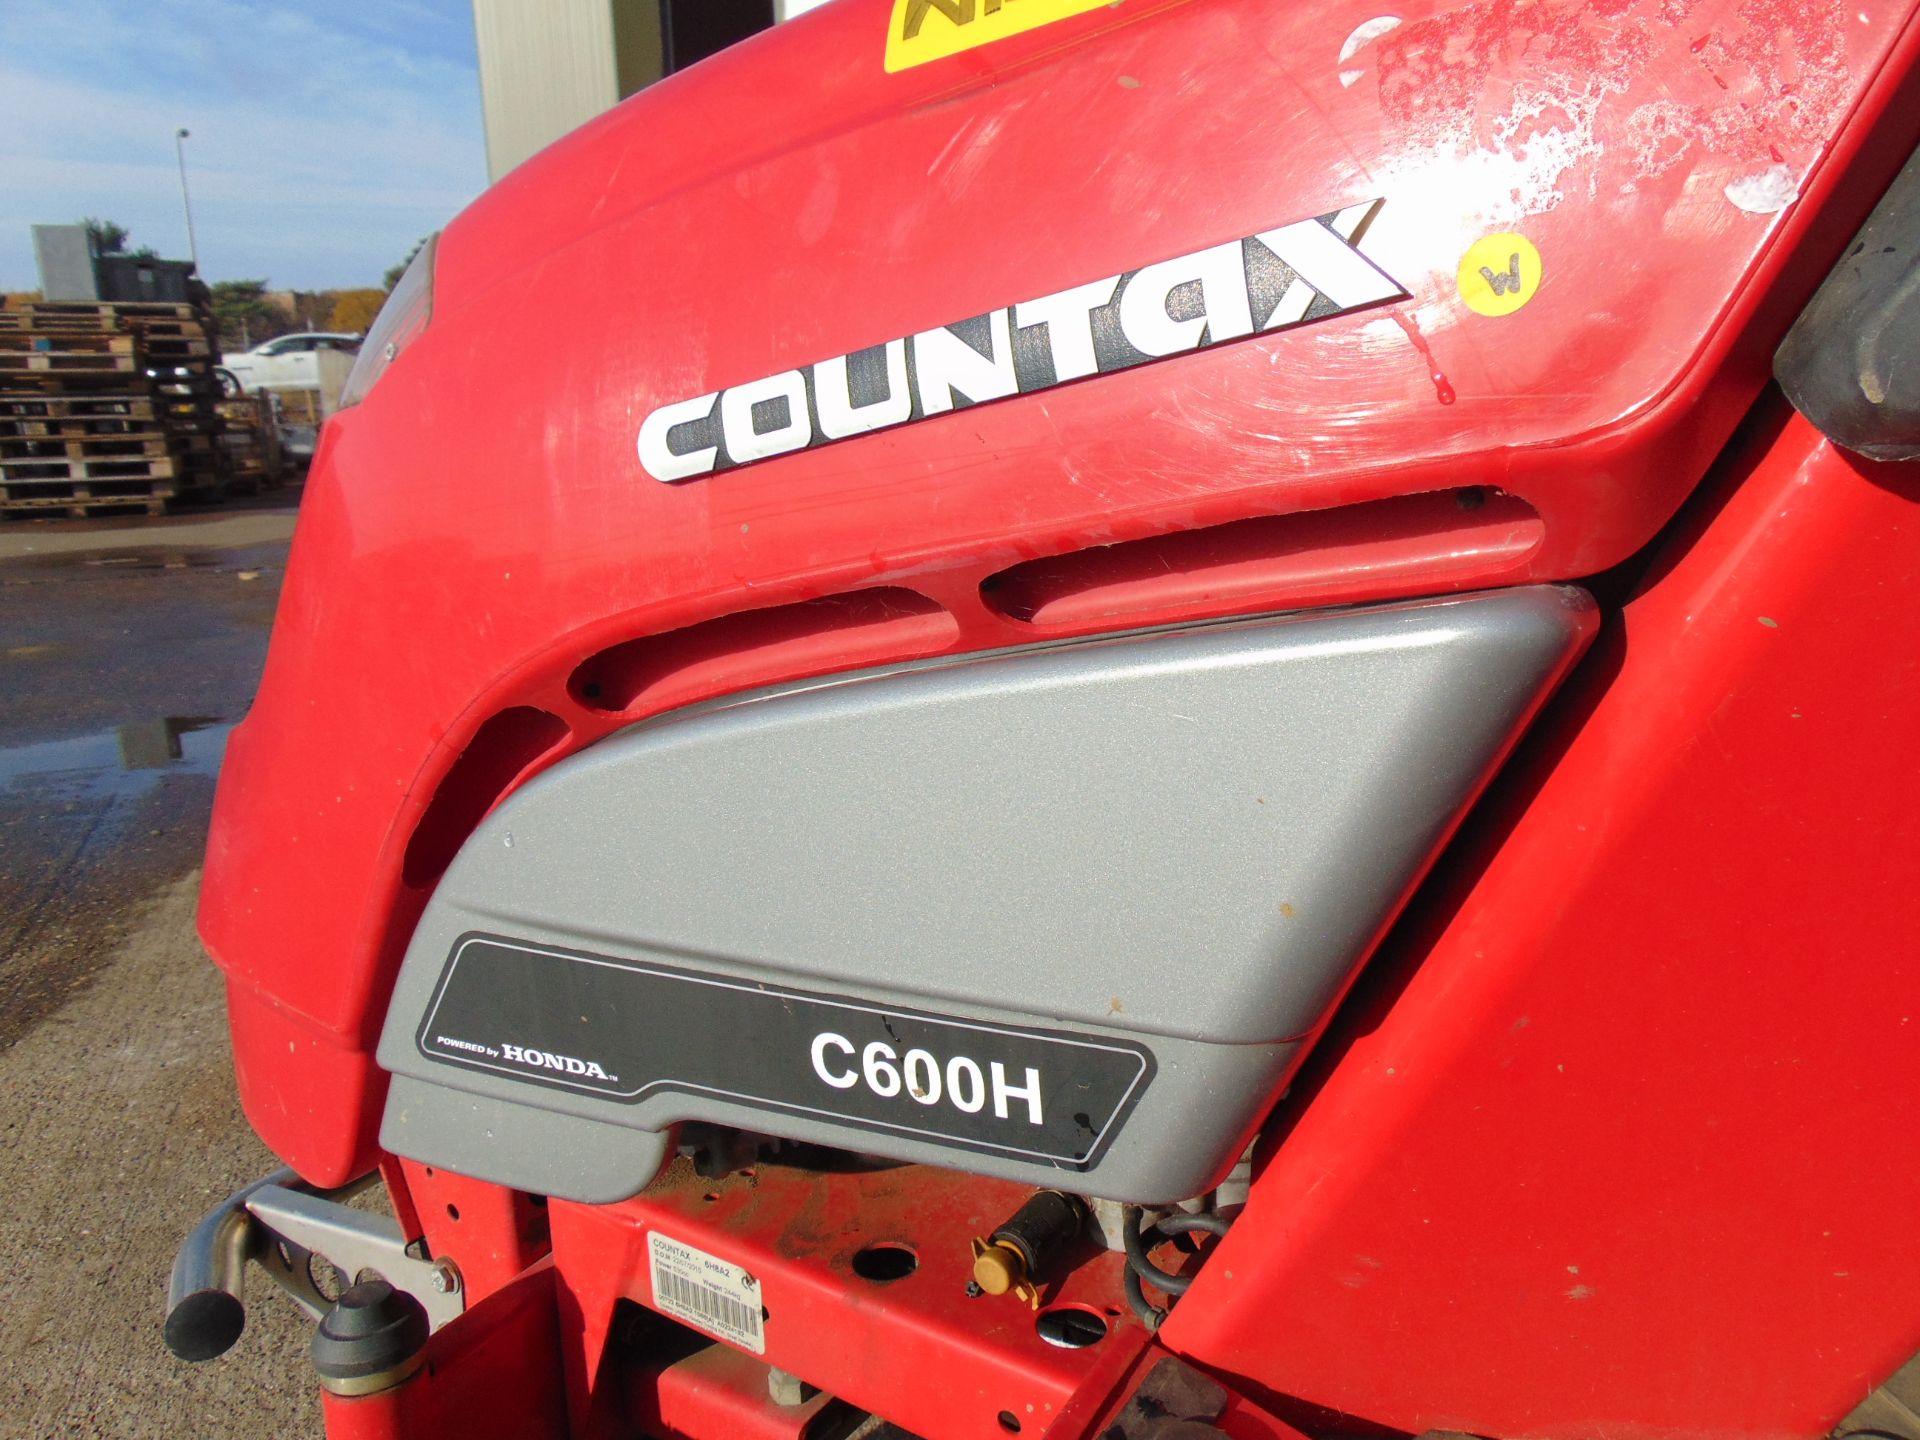 Countax C600H Ride On Garden Tractor c/w AM002 Powered Scarifier - Image 13 of 16